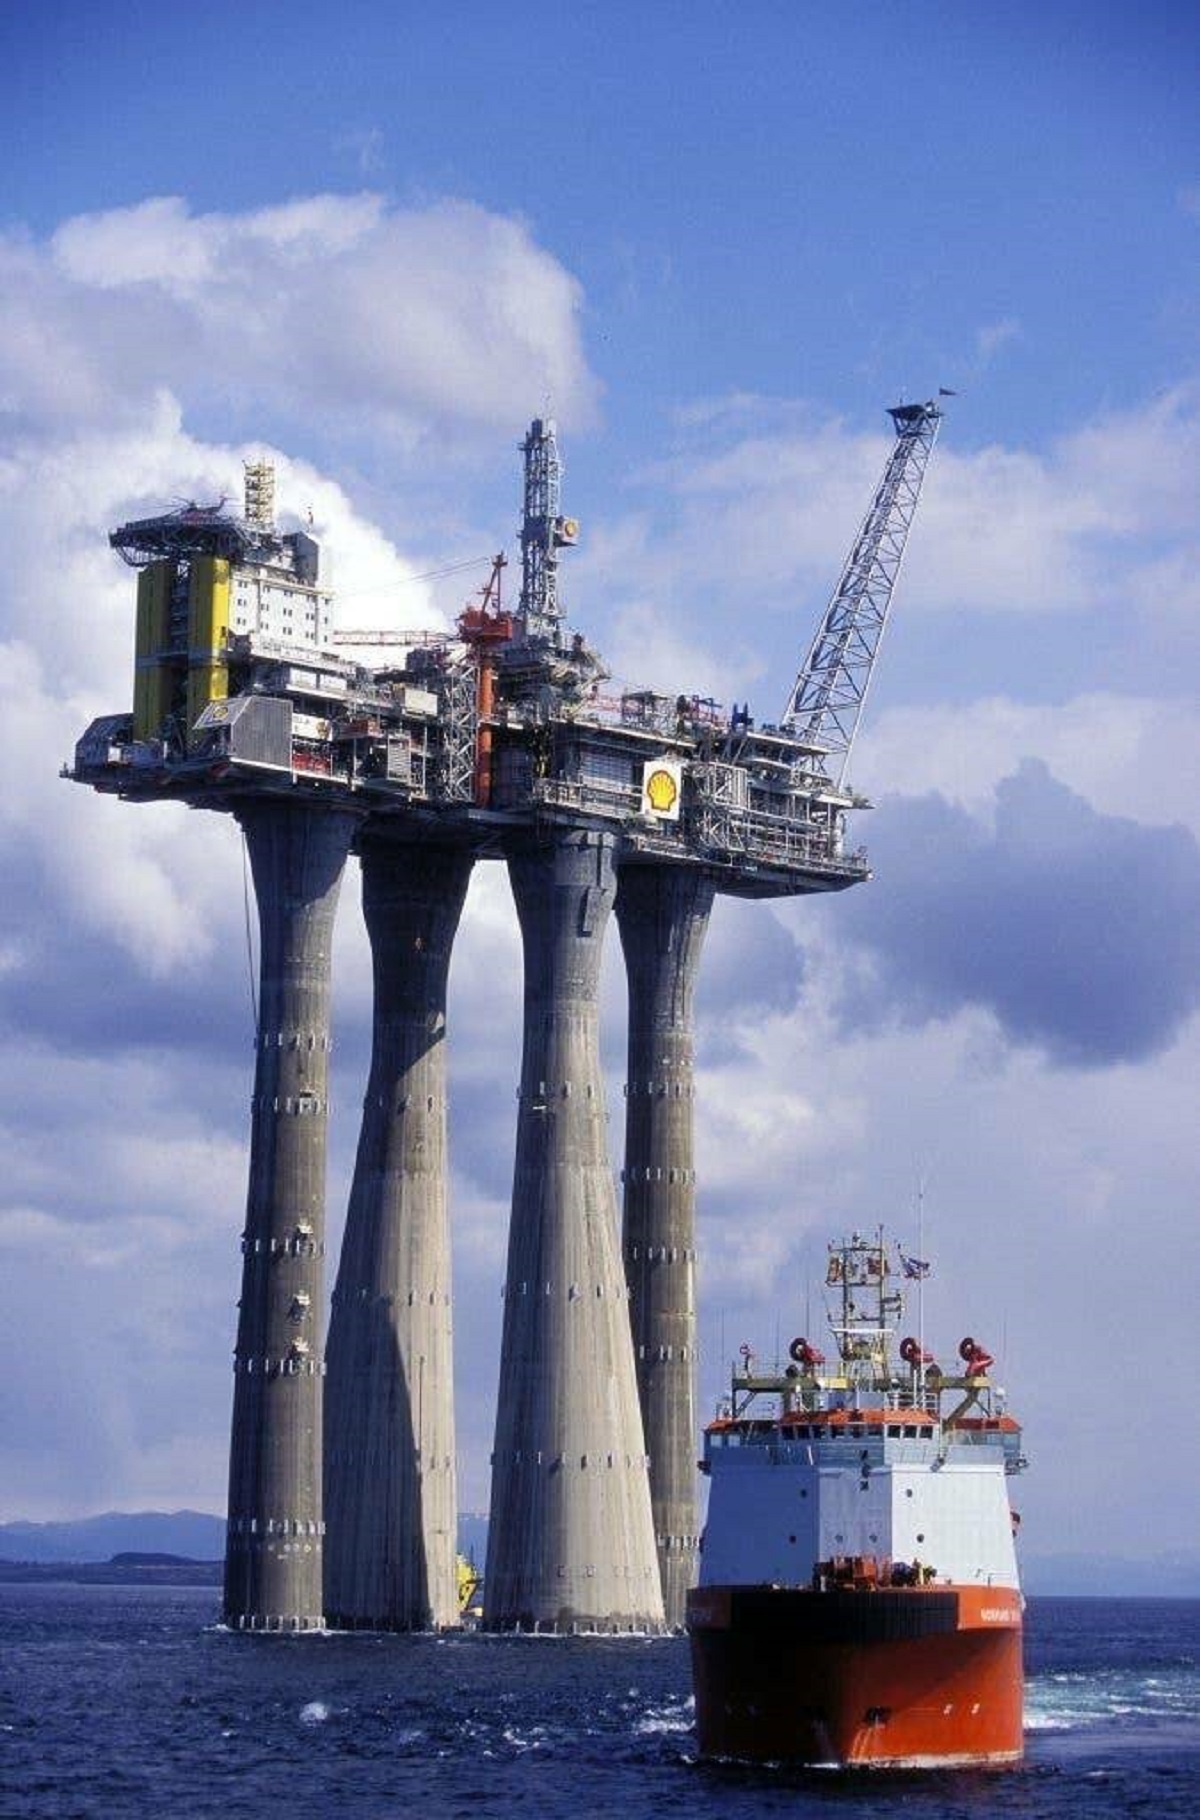 This is one of the world's largest offshore gas platforms, the Troll A platform, located in Norway: